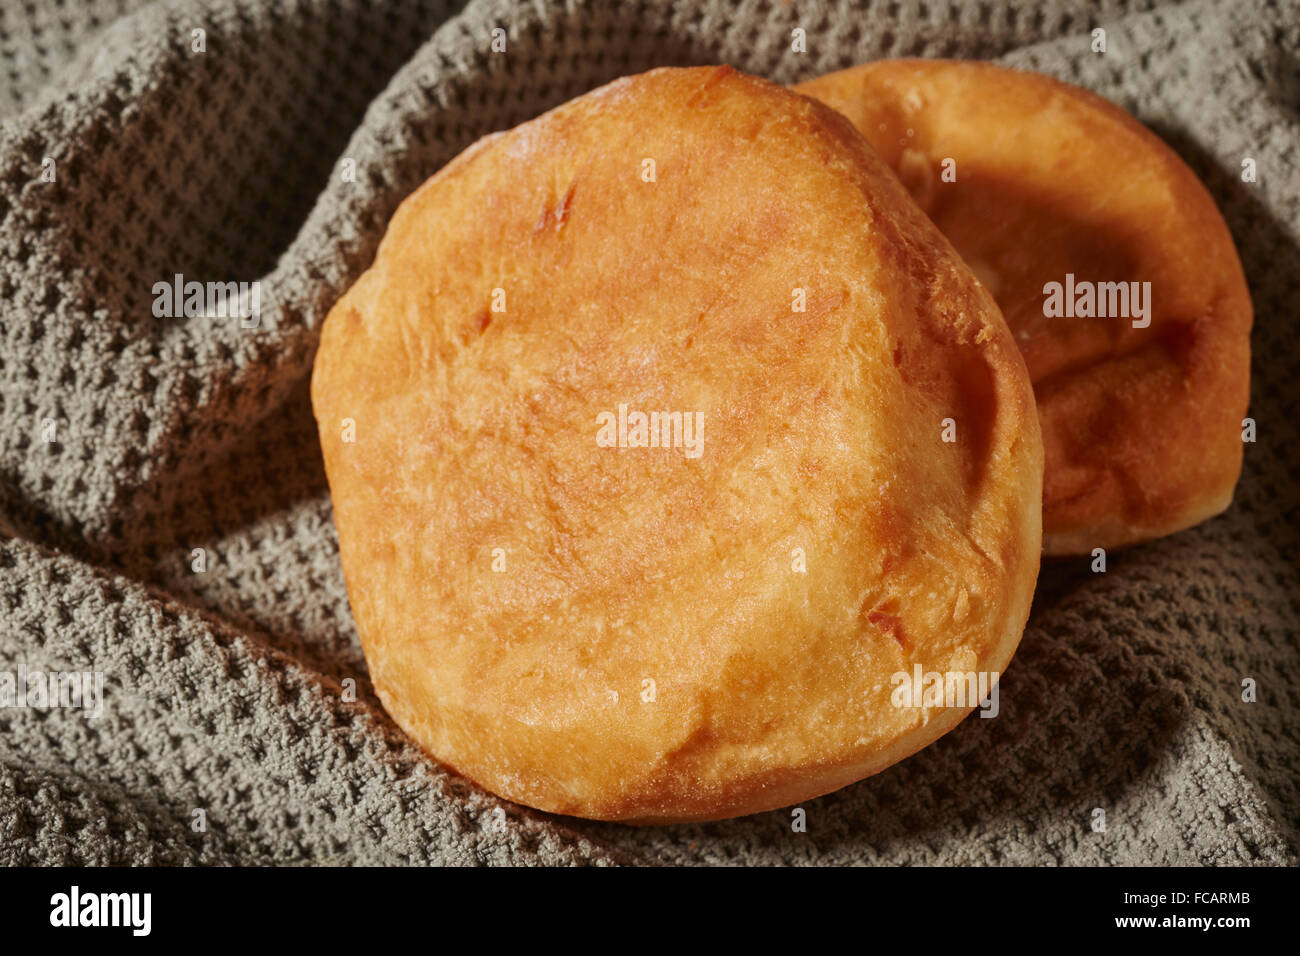 faschnauts, a typical Shrove Tuesday donut from Pennsylvania, USA Stock Photo